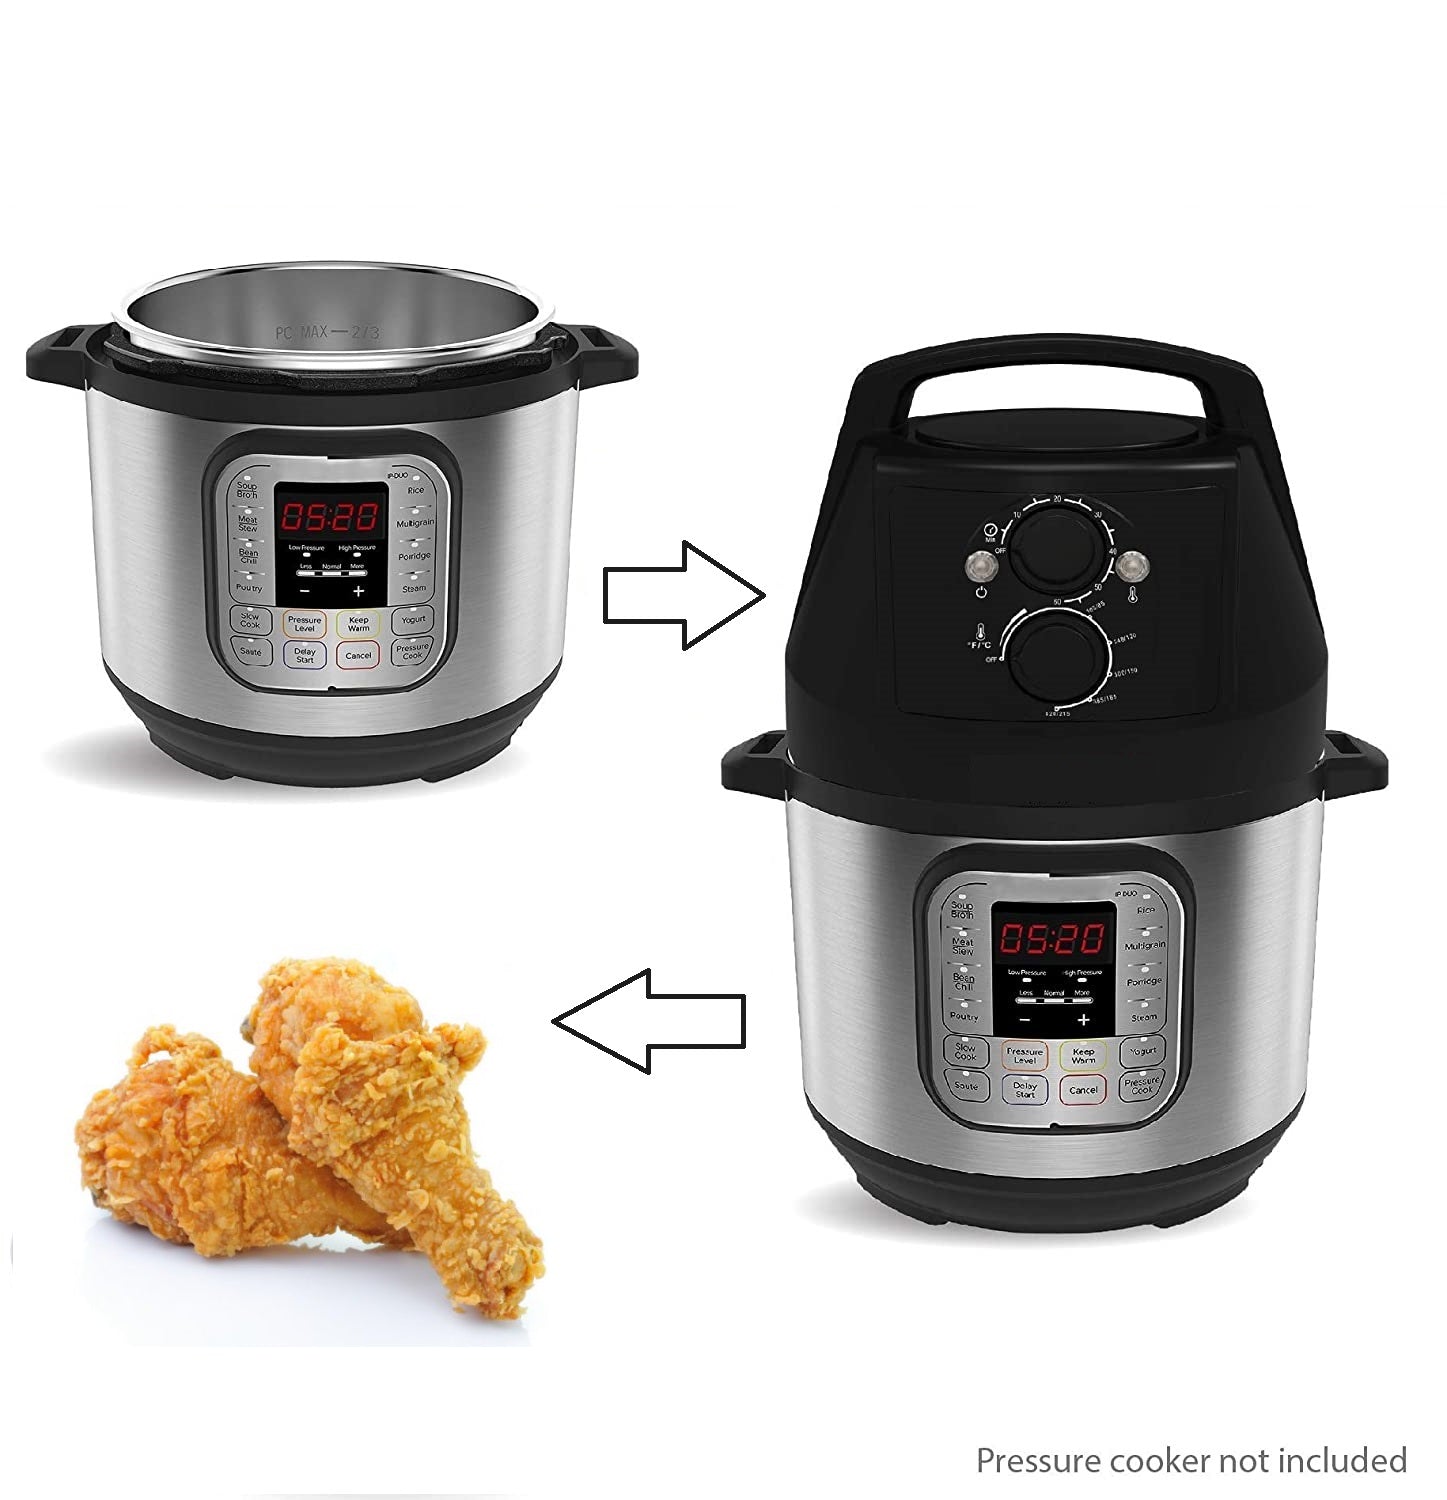 Instant Pot Air Fryer Lid - This Lid Turns Your Instant Pot into Air Fryer!